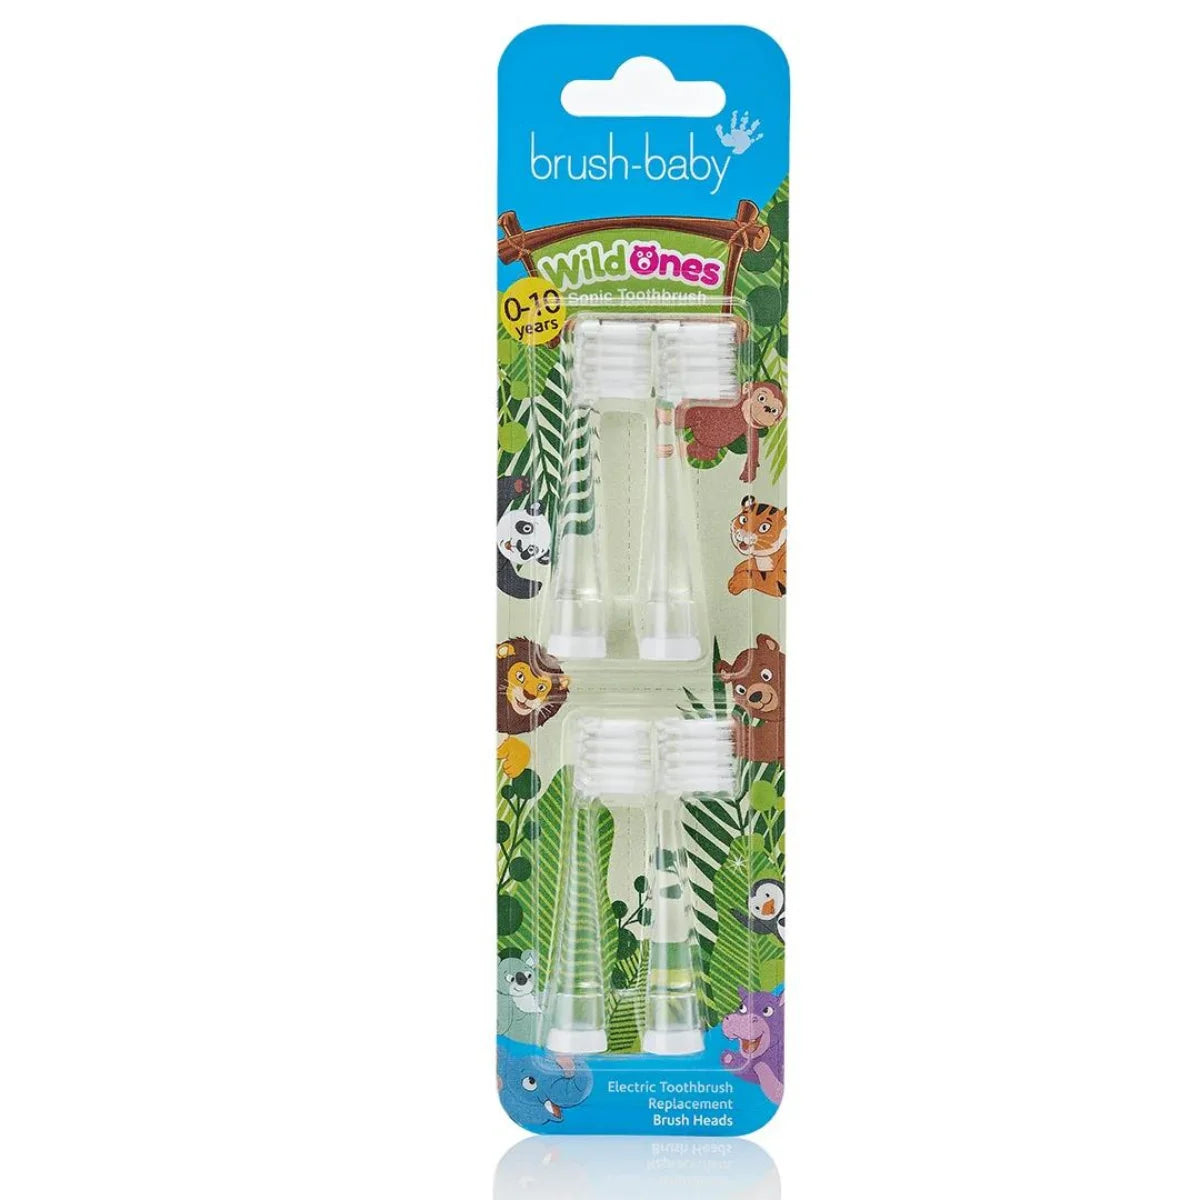 4 clear deep cleaning bristles toothbrush WildOnes replacement brush heads for children by BrushBaby